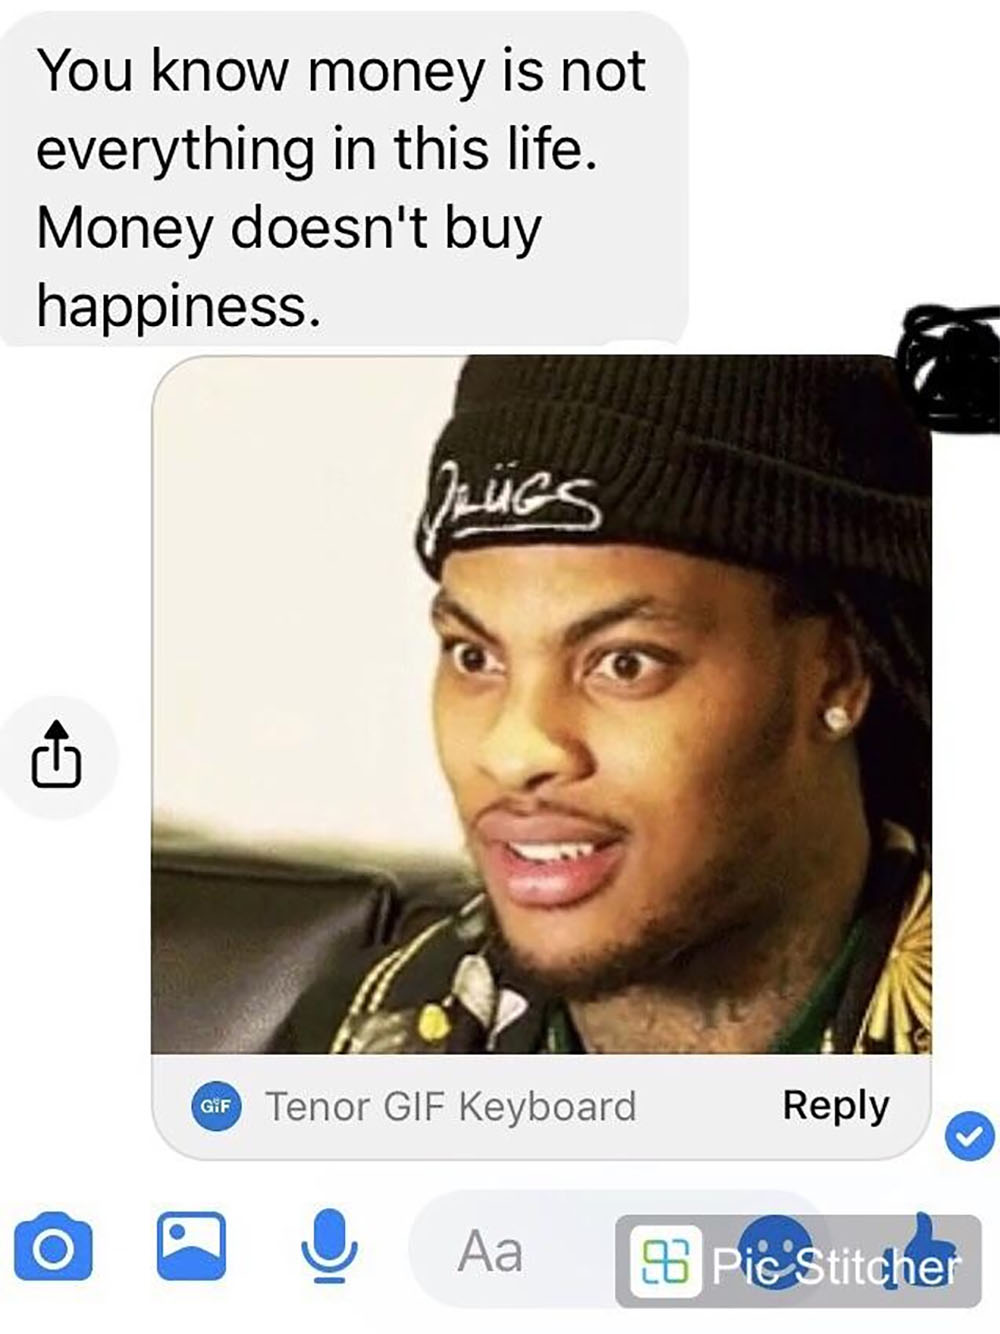 choosing beggars - beanie - You know money is not everything in this life. Money doesn't buy happiness. Gif Tenor Gif Keyboard O O Aa pestiche